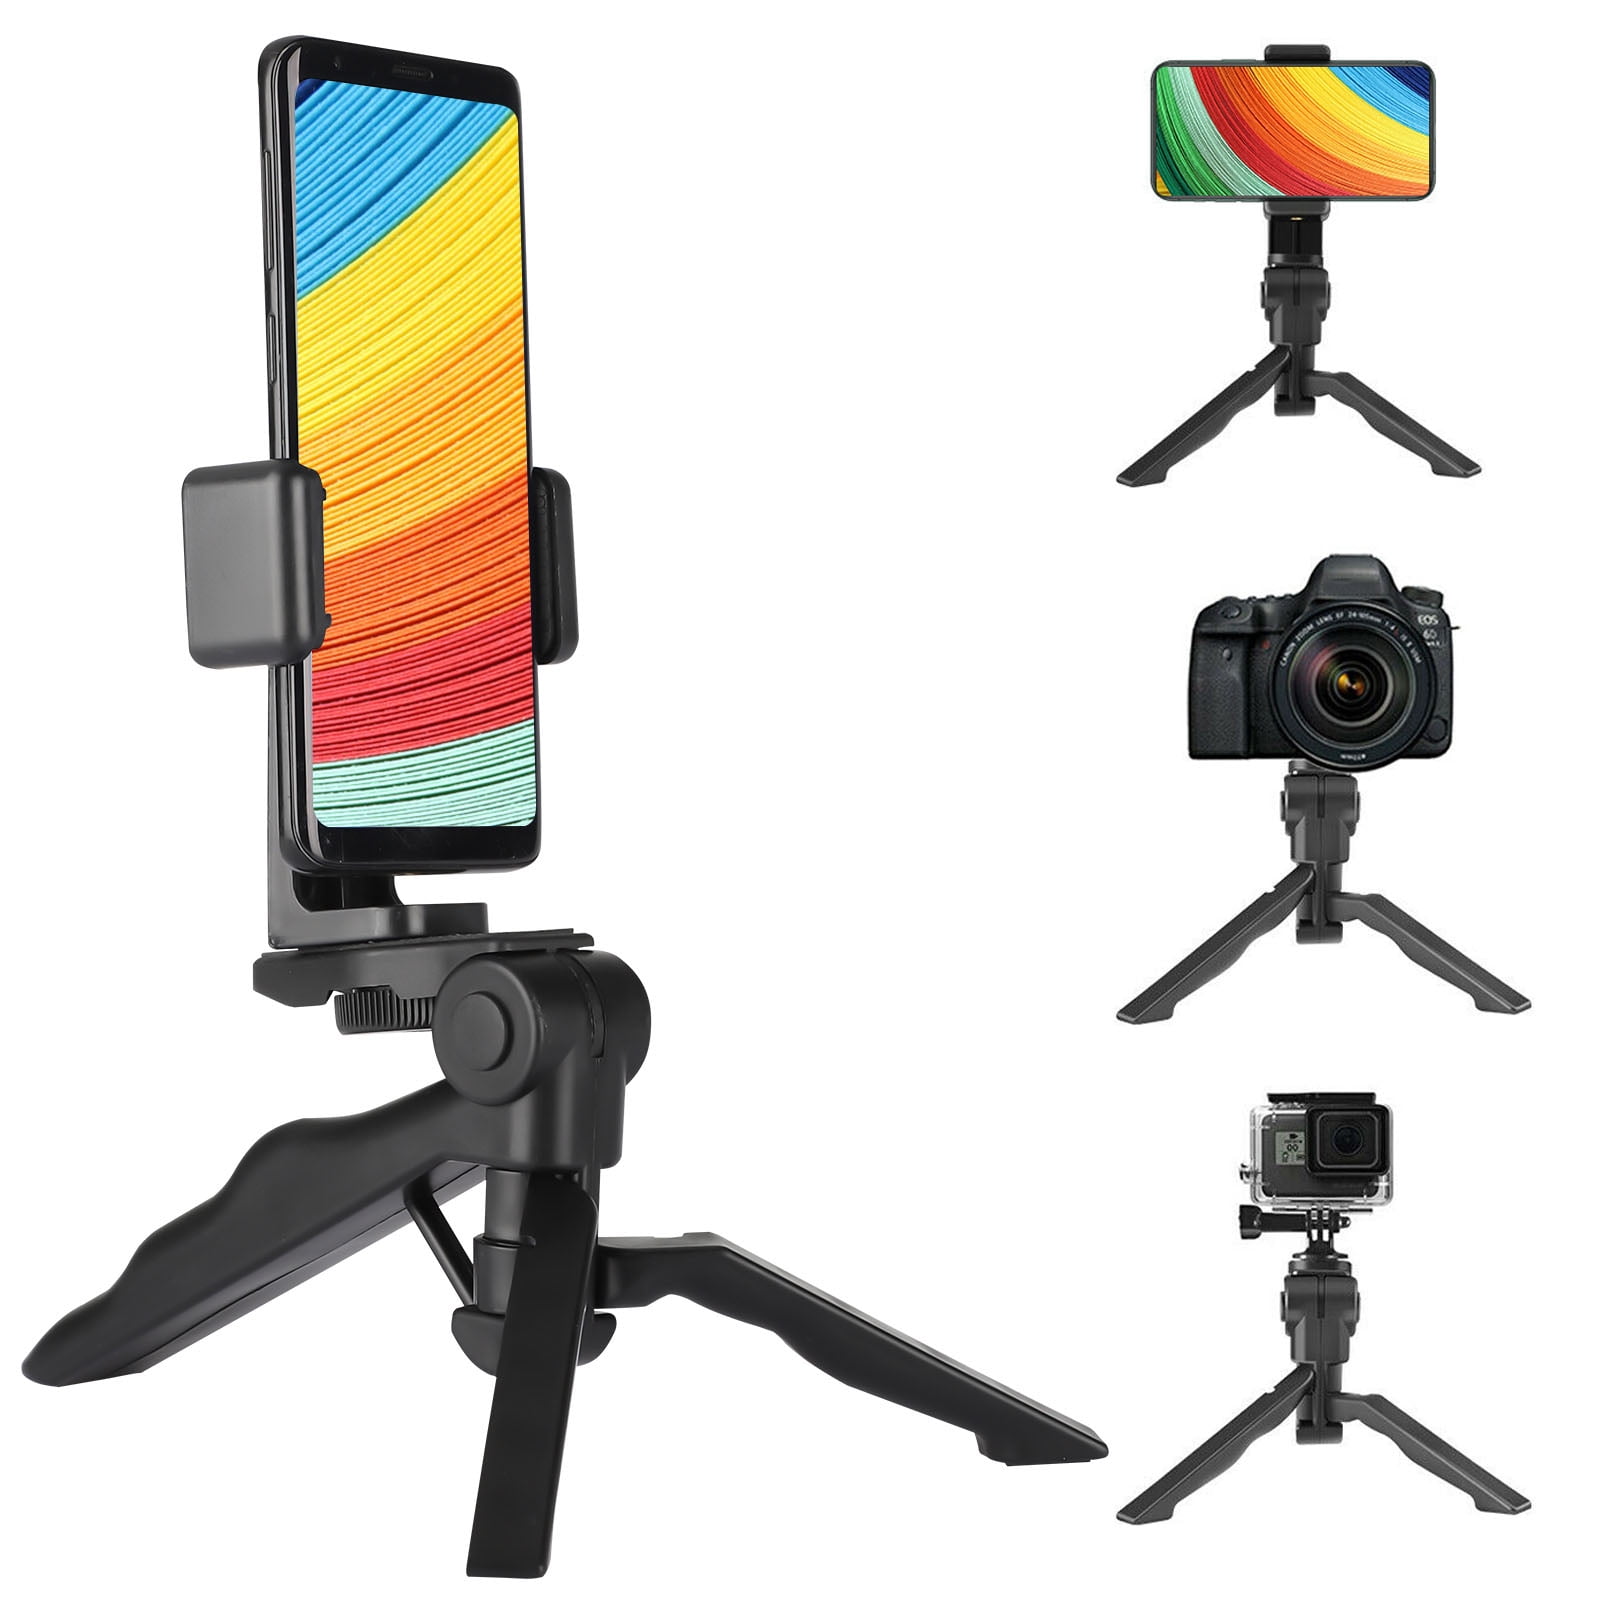 Small Vlogging Hand Held for Your iPhone iPad Smartphone and Webcam Vlog FaceTime and Take a Selfie From a Desk or Tabletop Mini Tripod Cell Phone Stand Clovis Supply CS 50 Removable Ball Head 